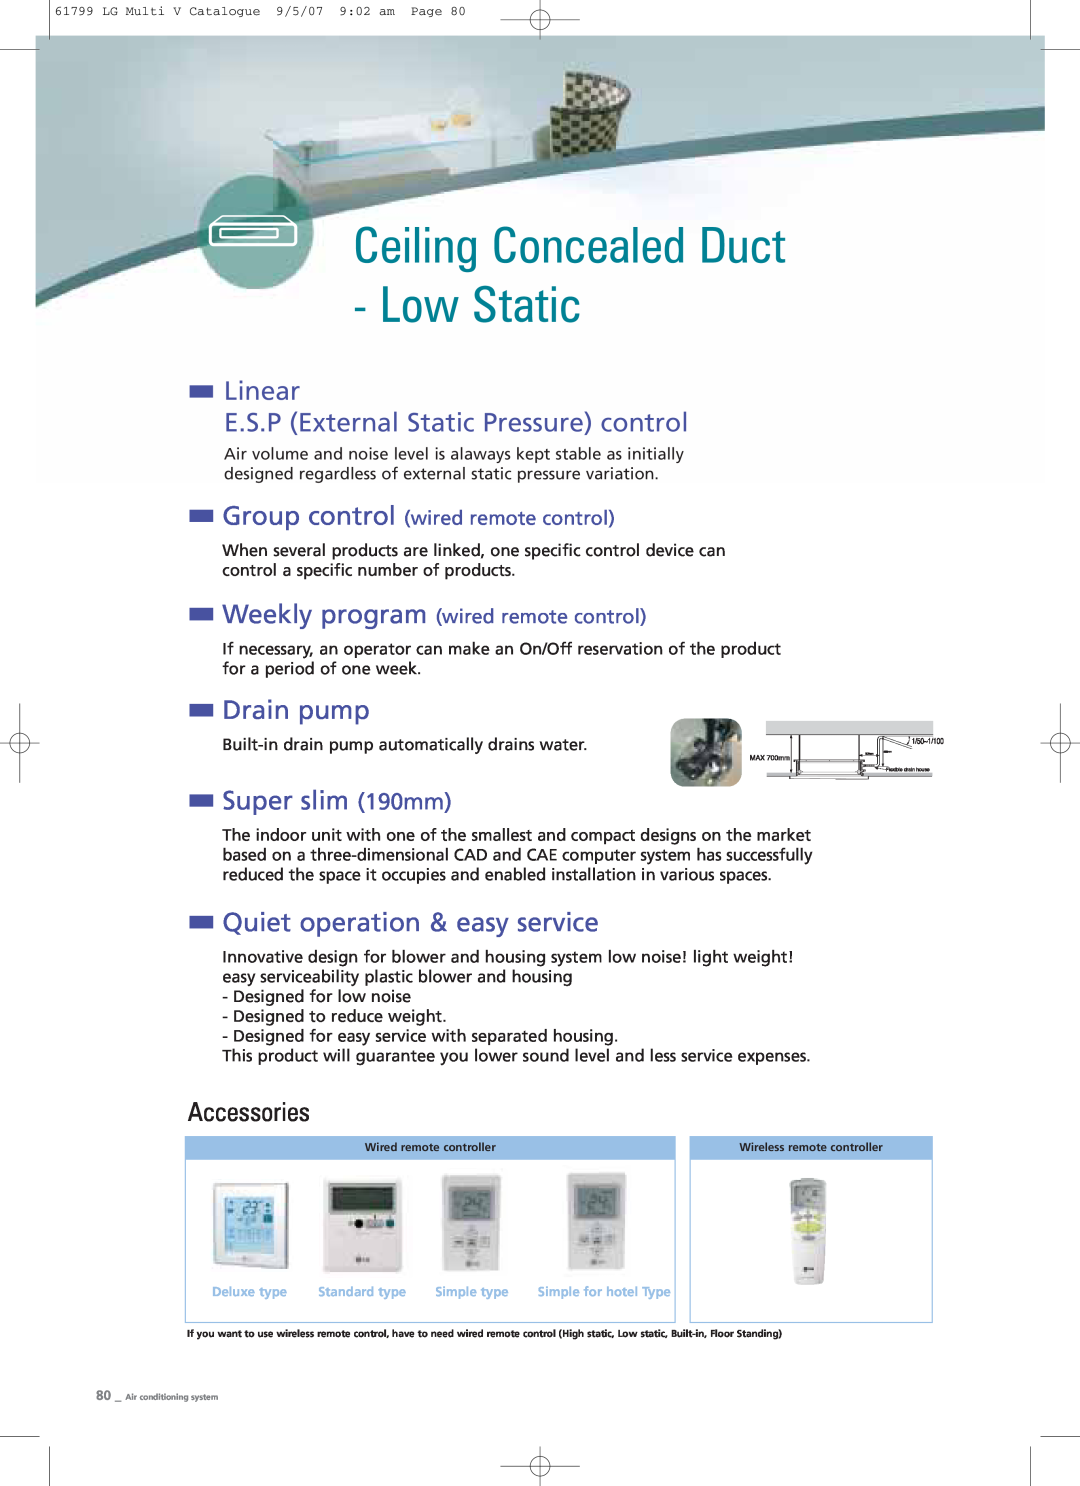 LG Electronics PRHR040 Ceiling Concealed Duct - Low Static, Super slim 190mm, Drain pump, Quiet operation & easy service 